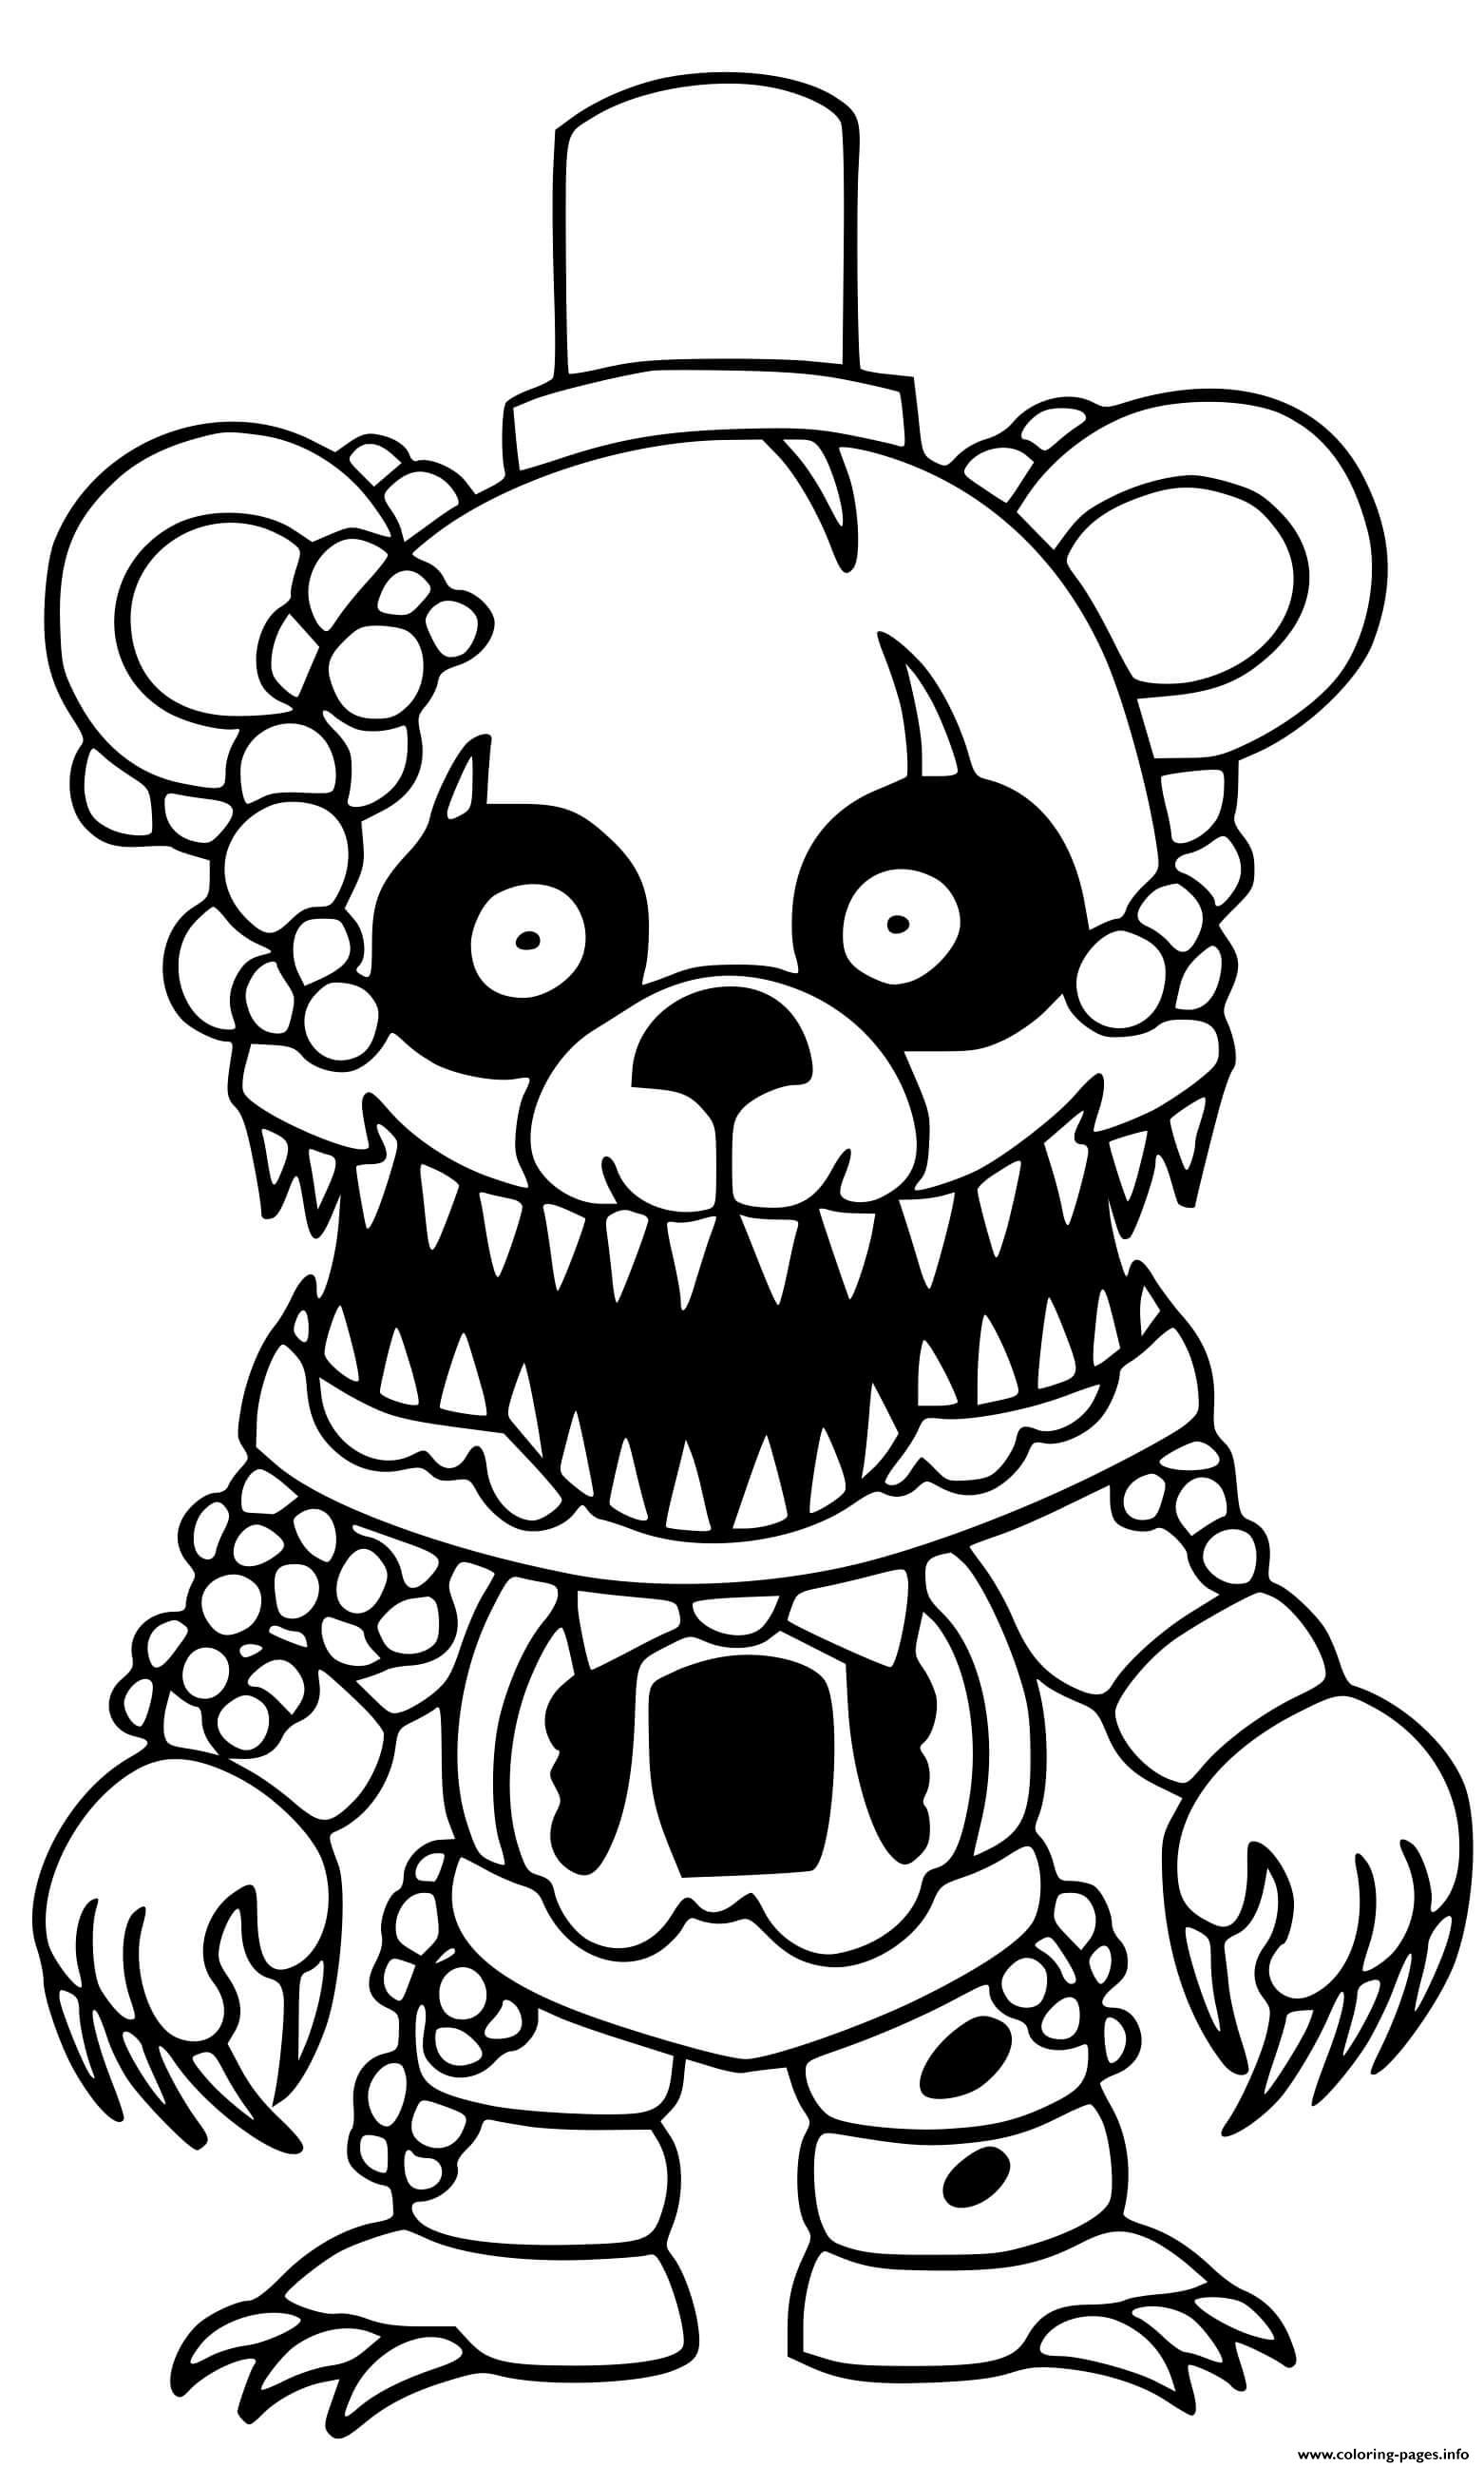 Five Nights At Freddy s Coloring Pages Ready To Print Vegandivas NYC